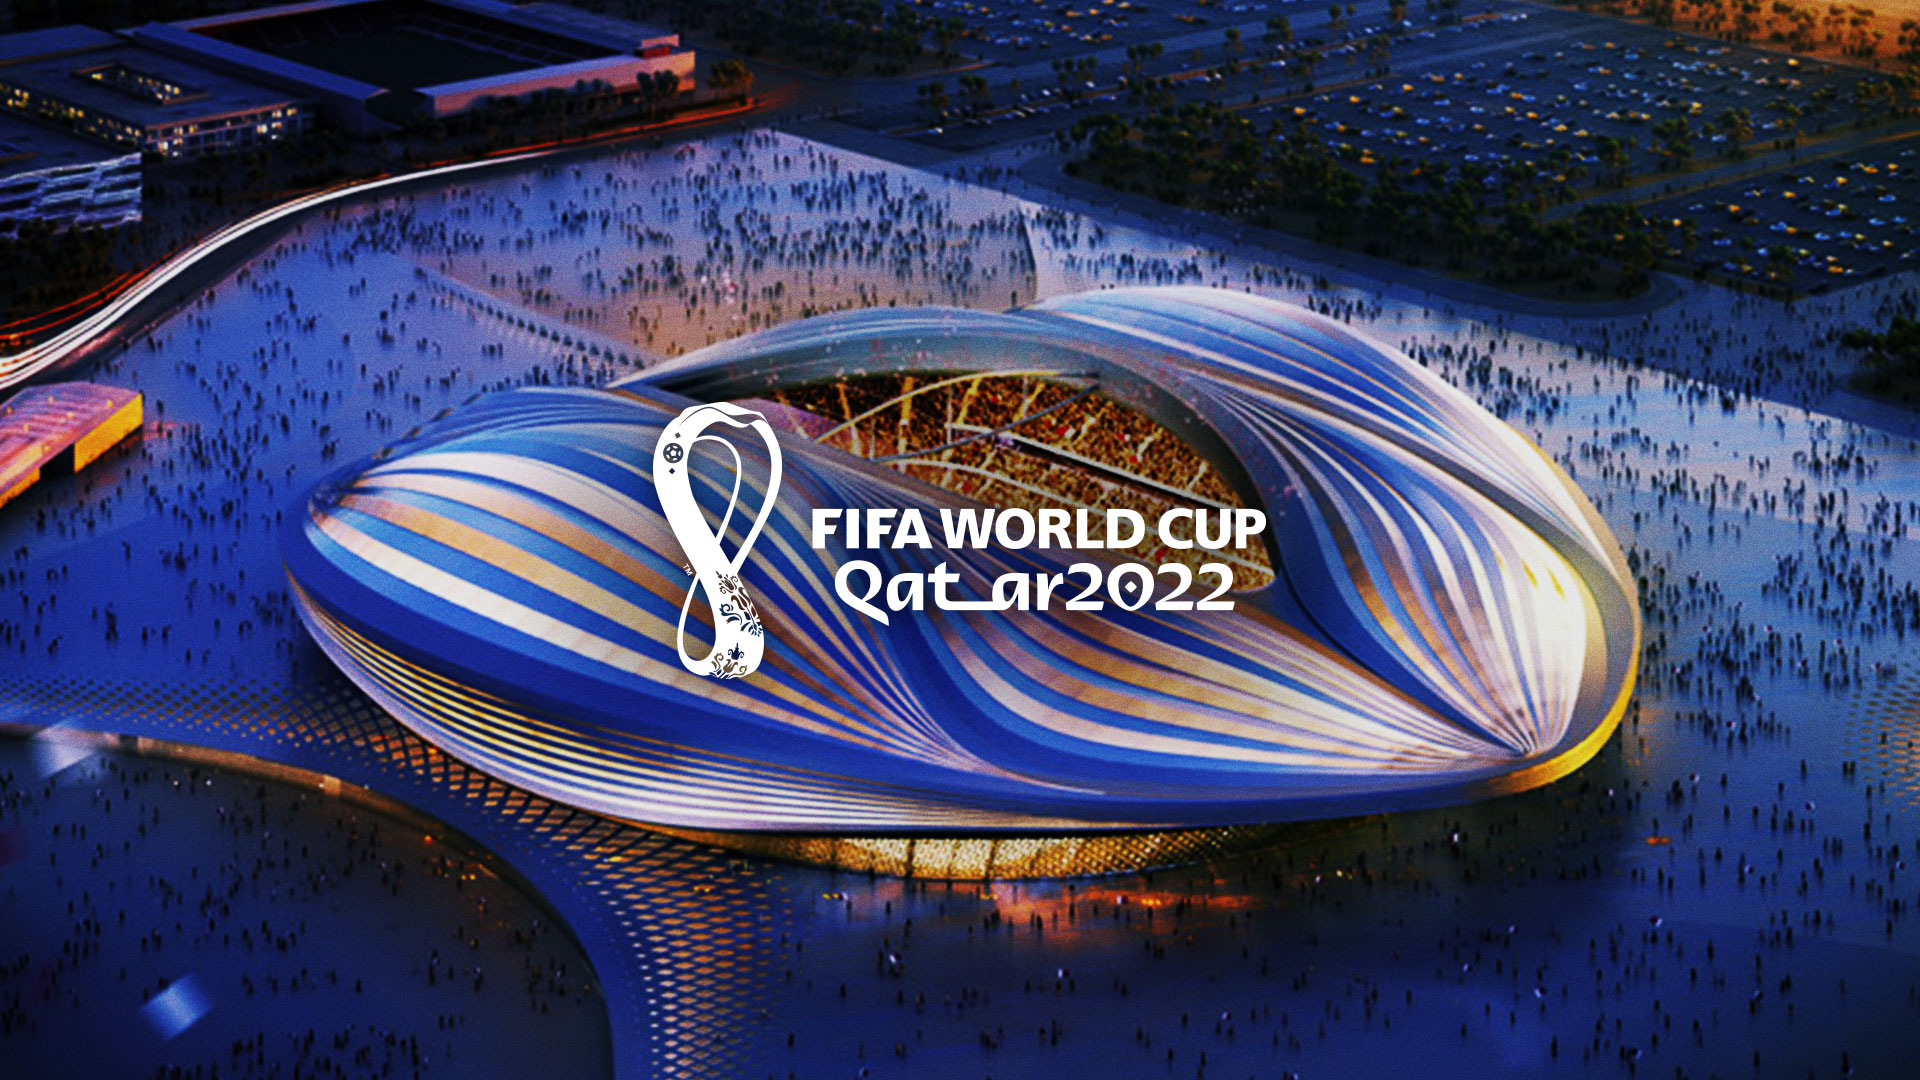 Tubi launching a 2022 FIFA World Cup on-demand channel Digital Trends